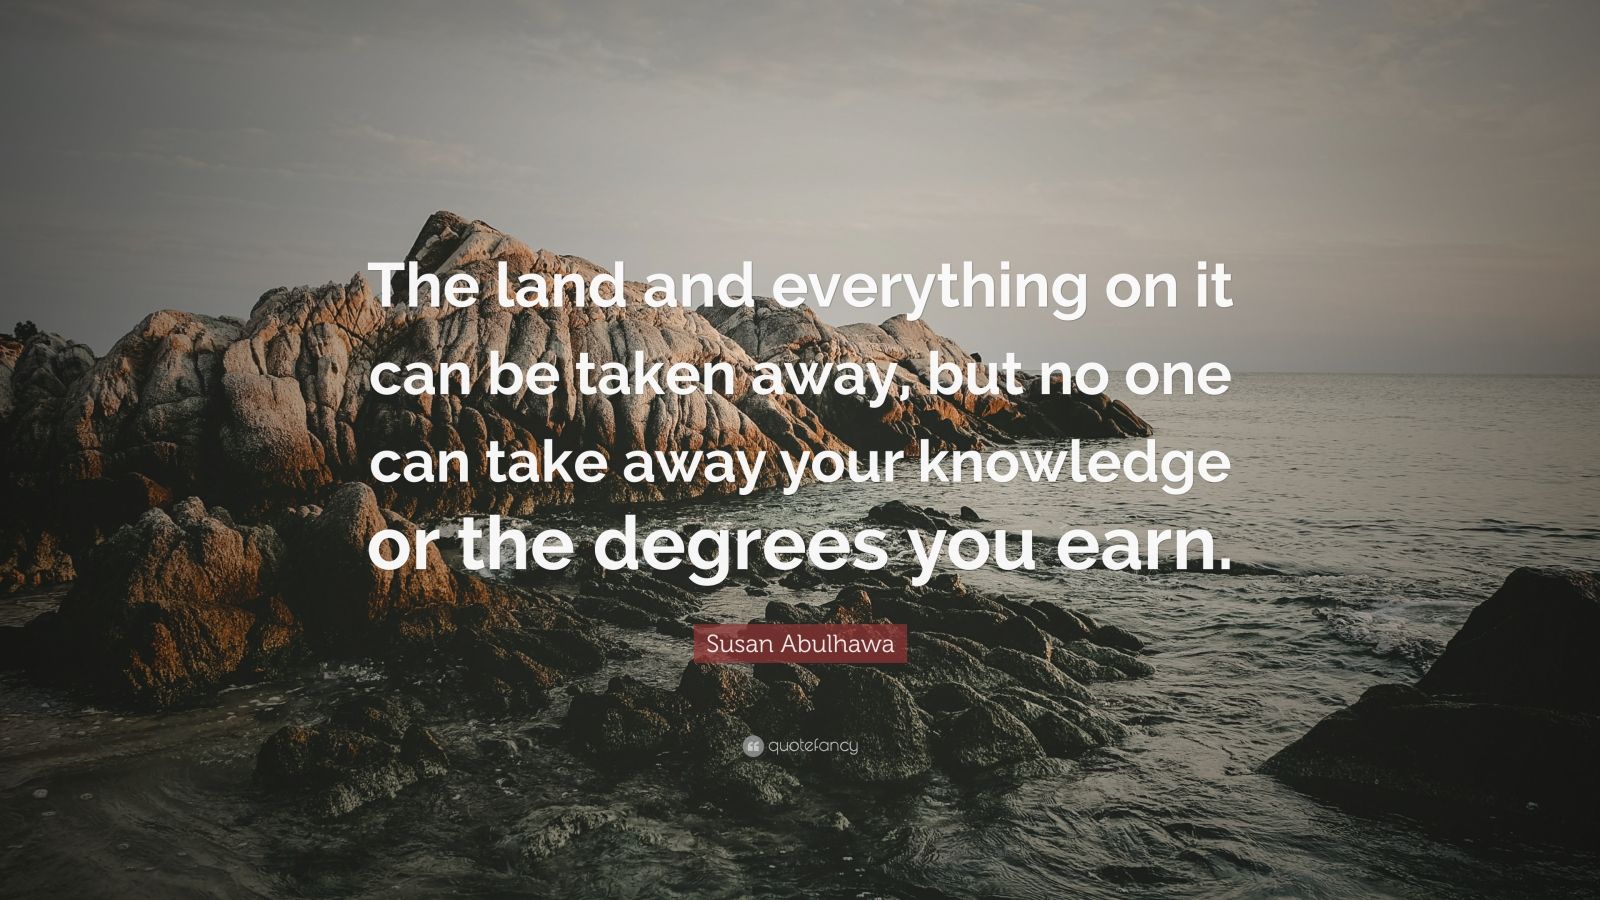 Susan Abulhawa Quote: “The land and everything on it can be taken away ...